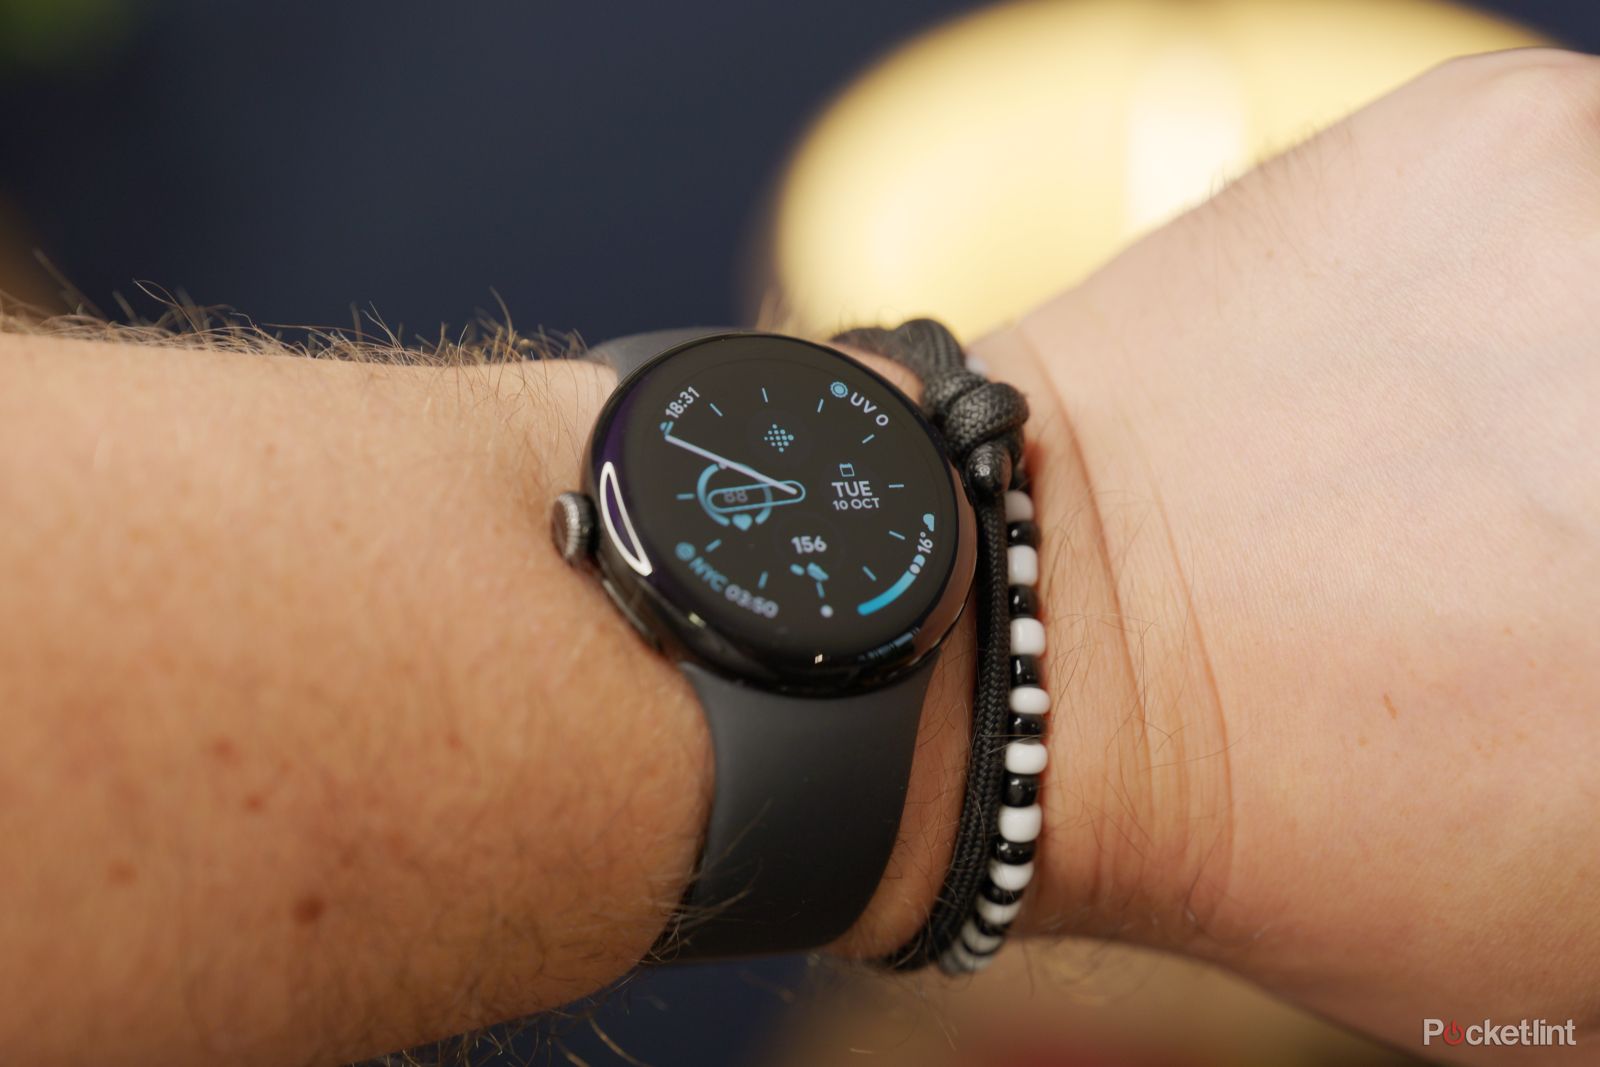 Why Would You Buy a Wear OS Smartwatch?